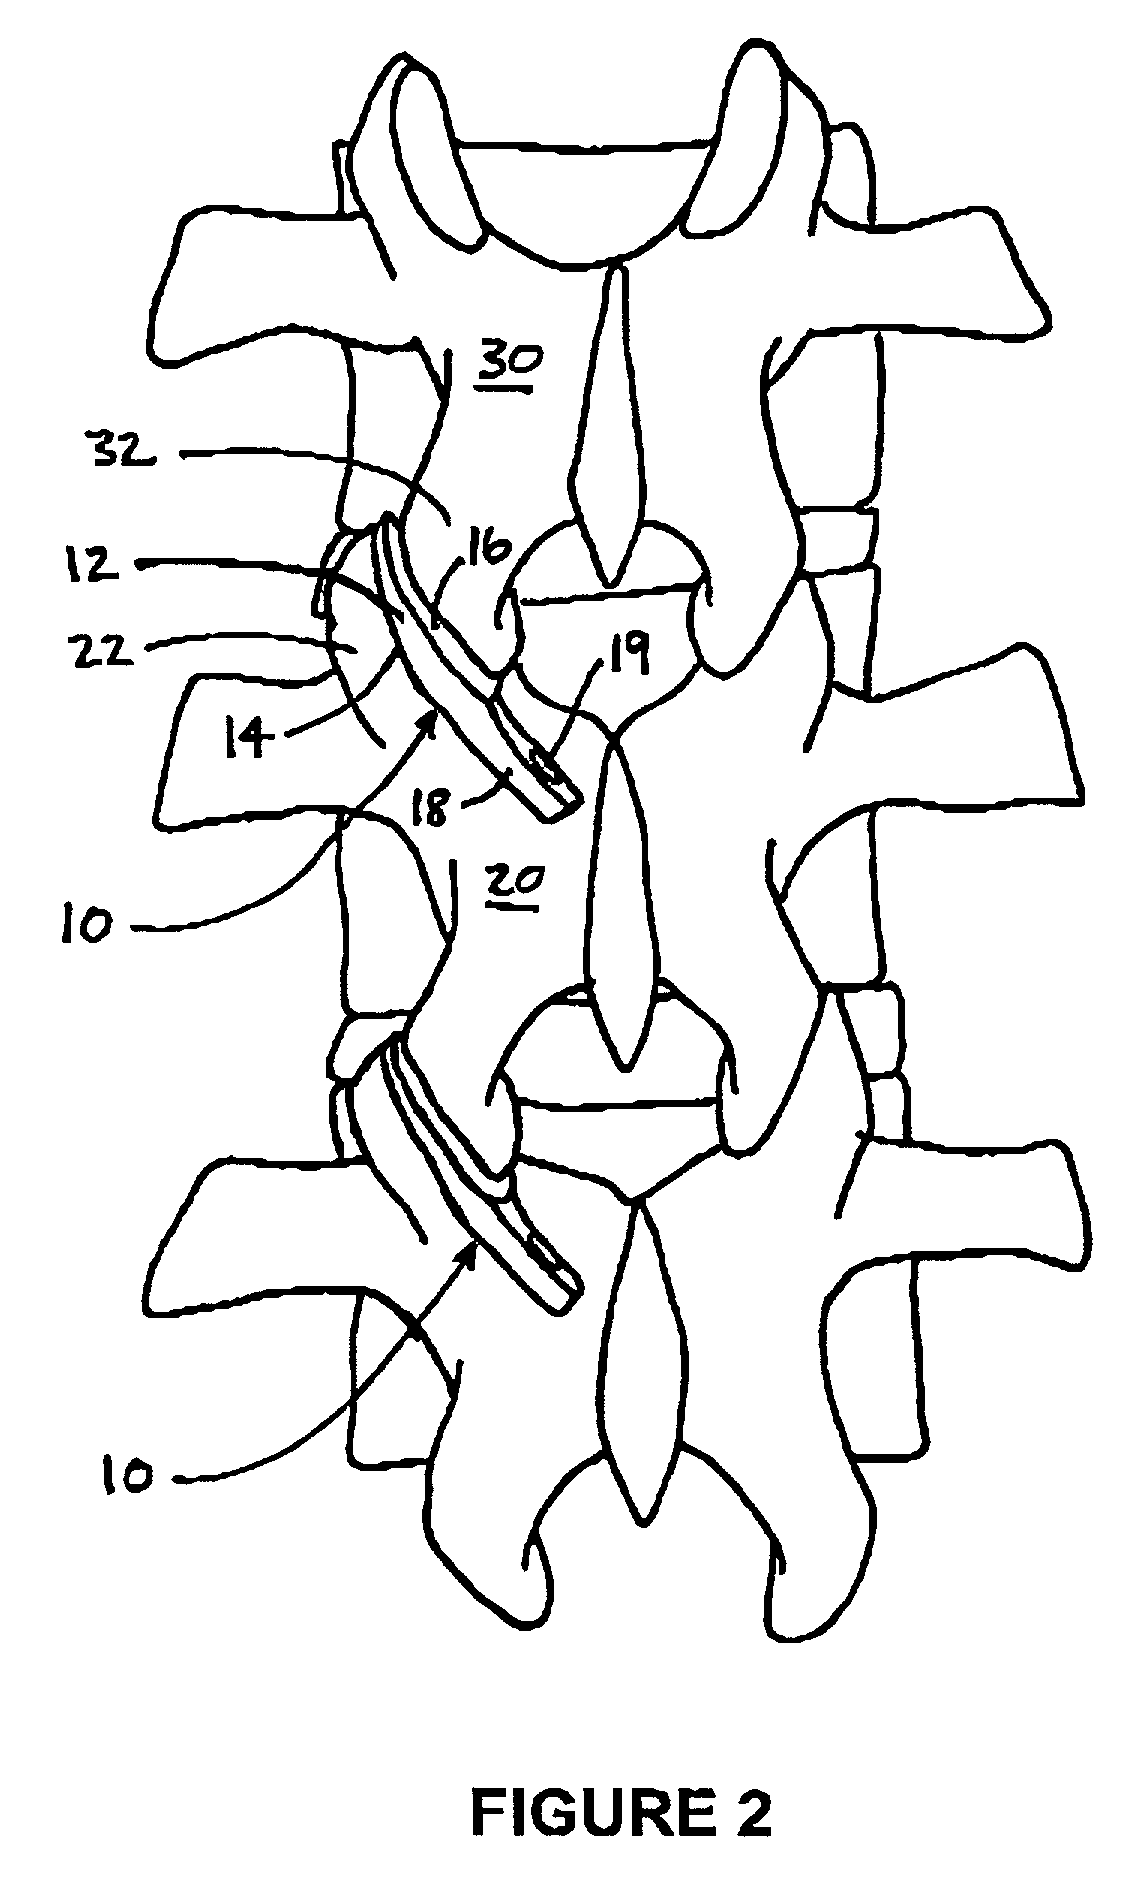 Method and device for treating scoliosis